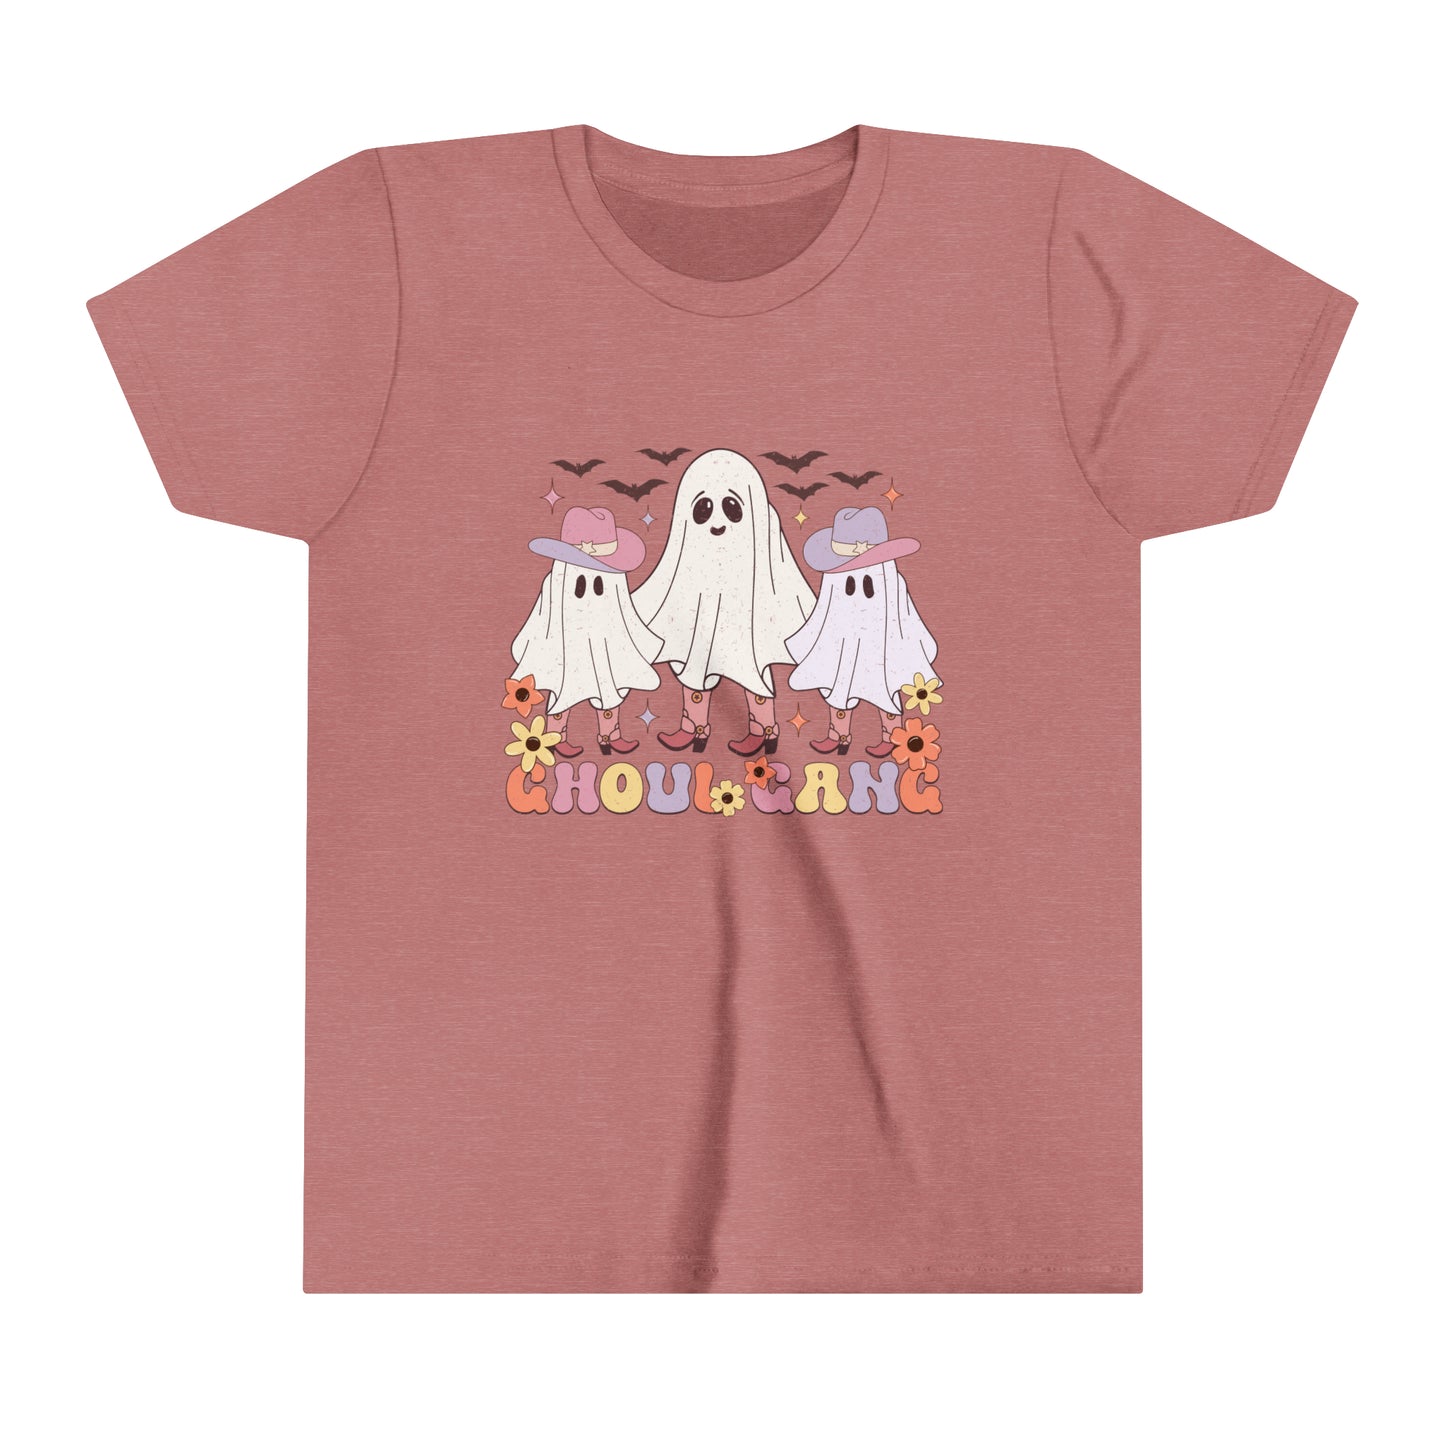 Ghoul Gang Girl's Youth Short Sleeve Tee